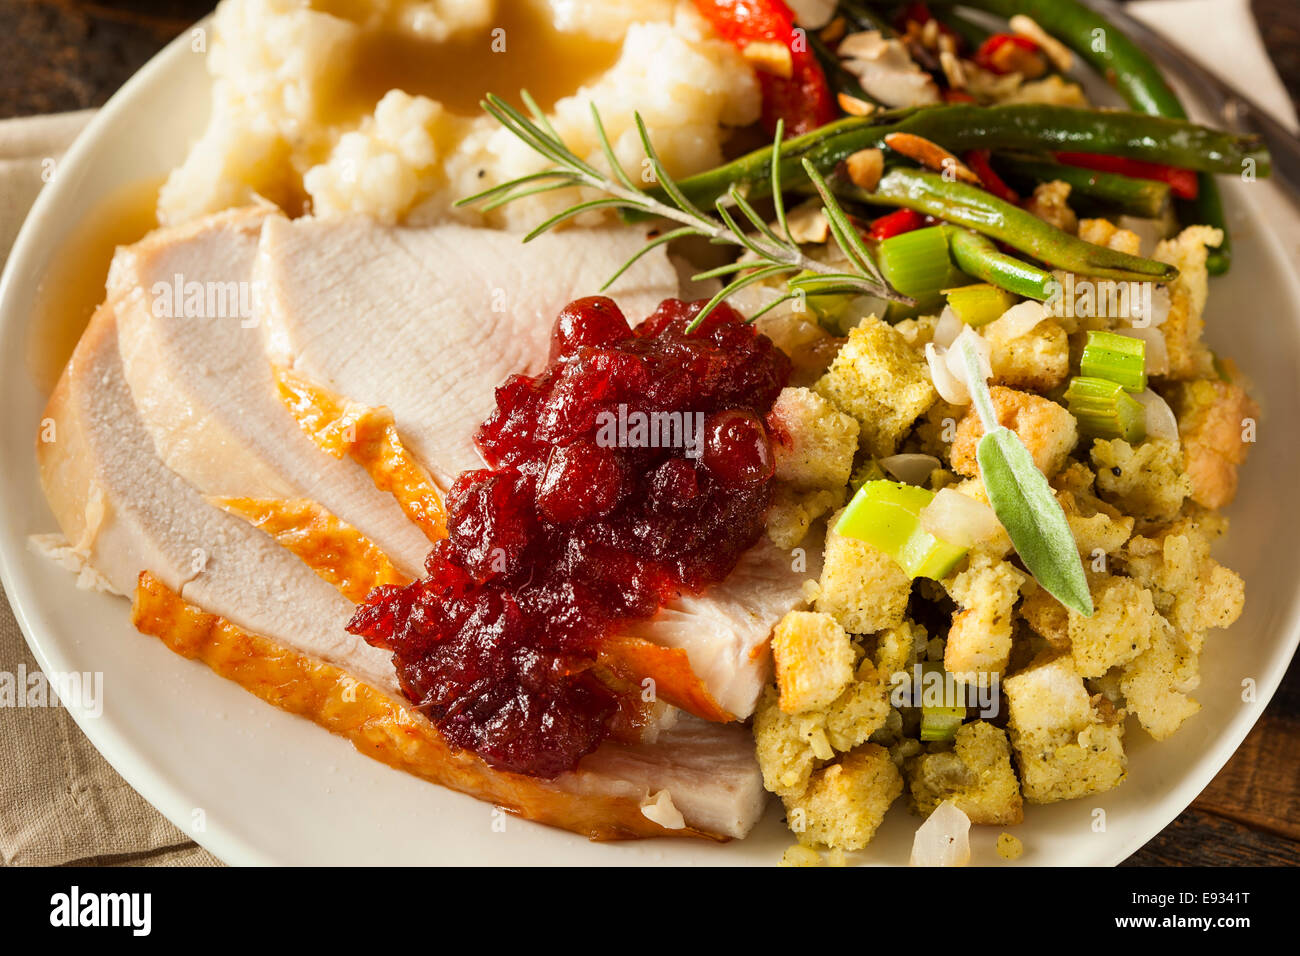 Homemade Thanksgiving Turkey on a Plate with Stuffing and Potatoes Stock Photo